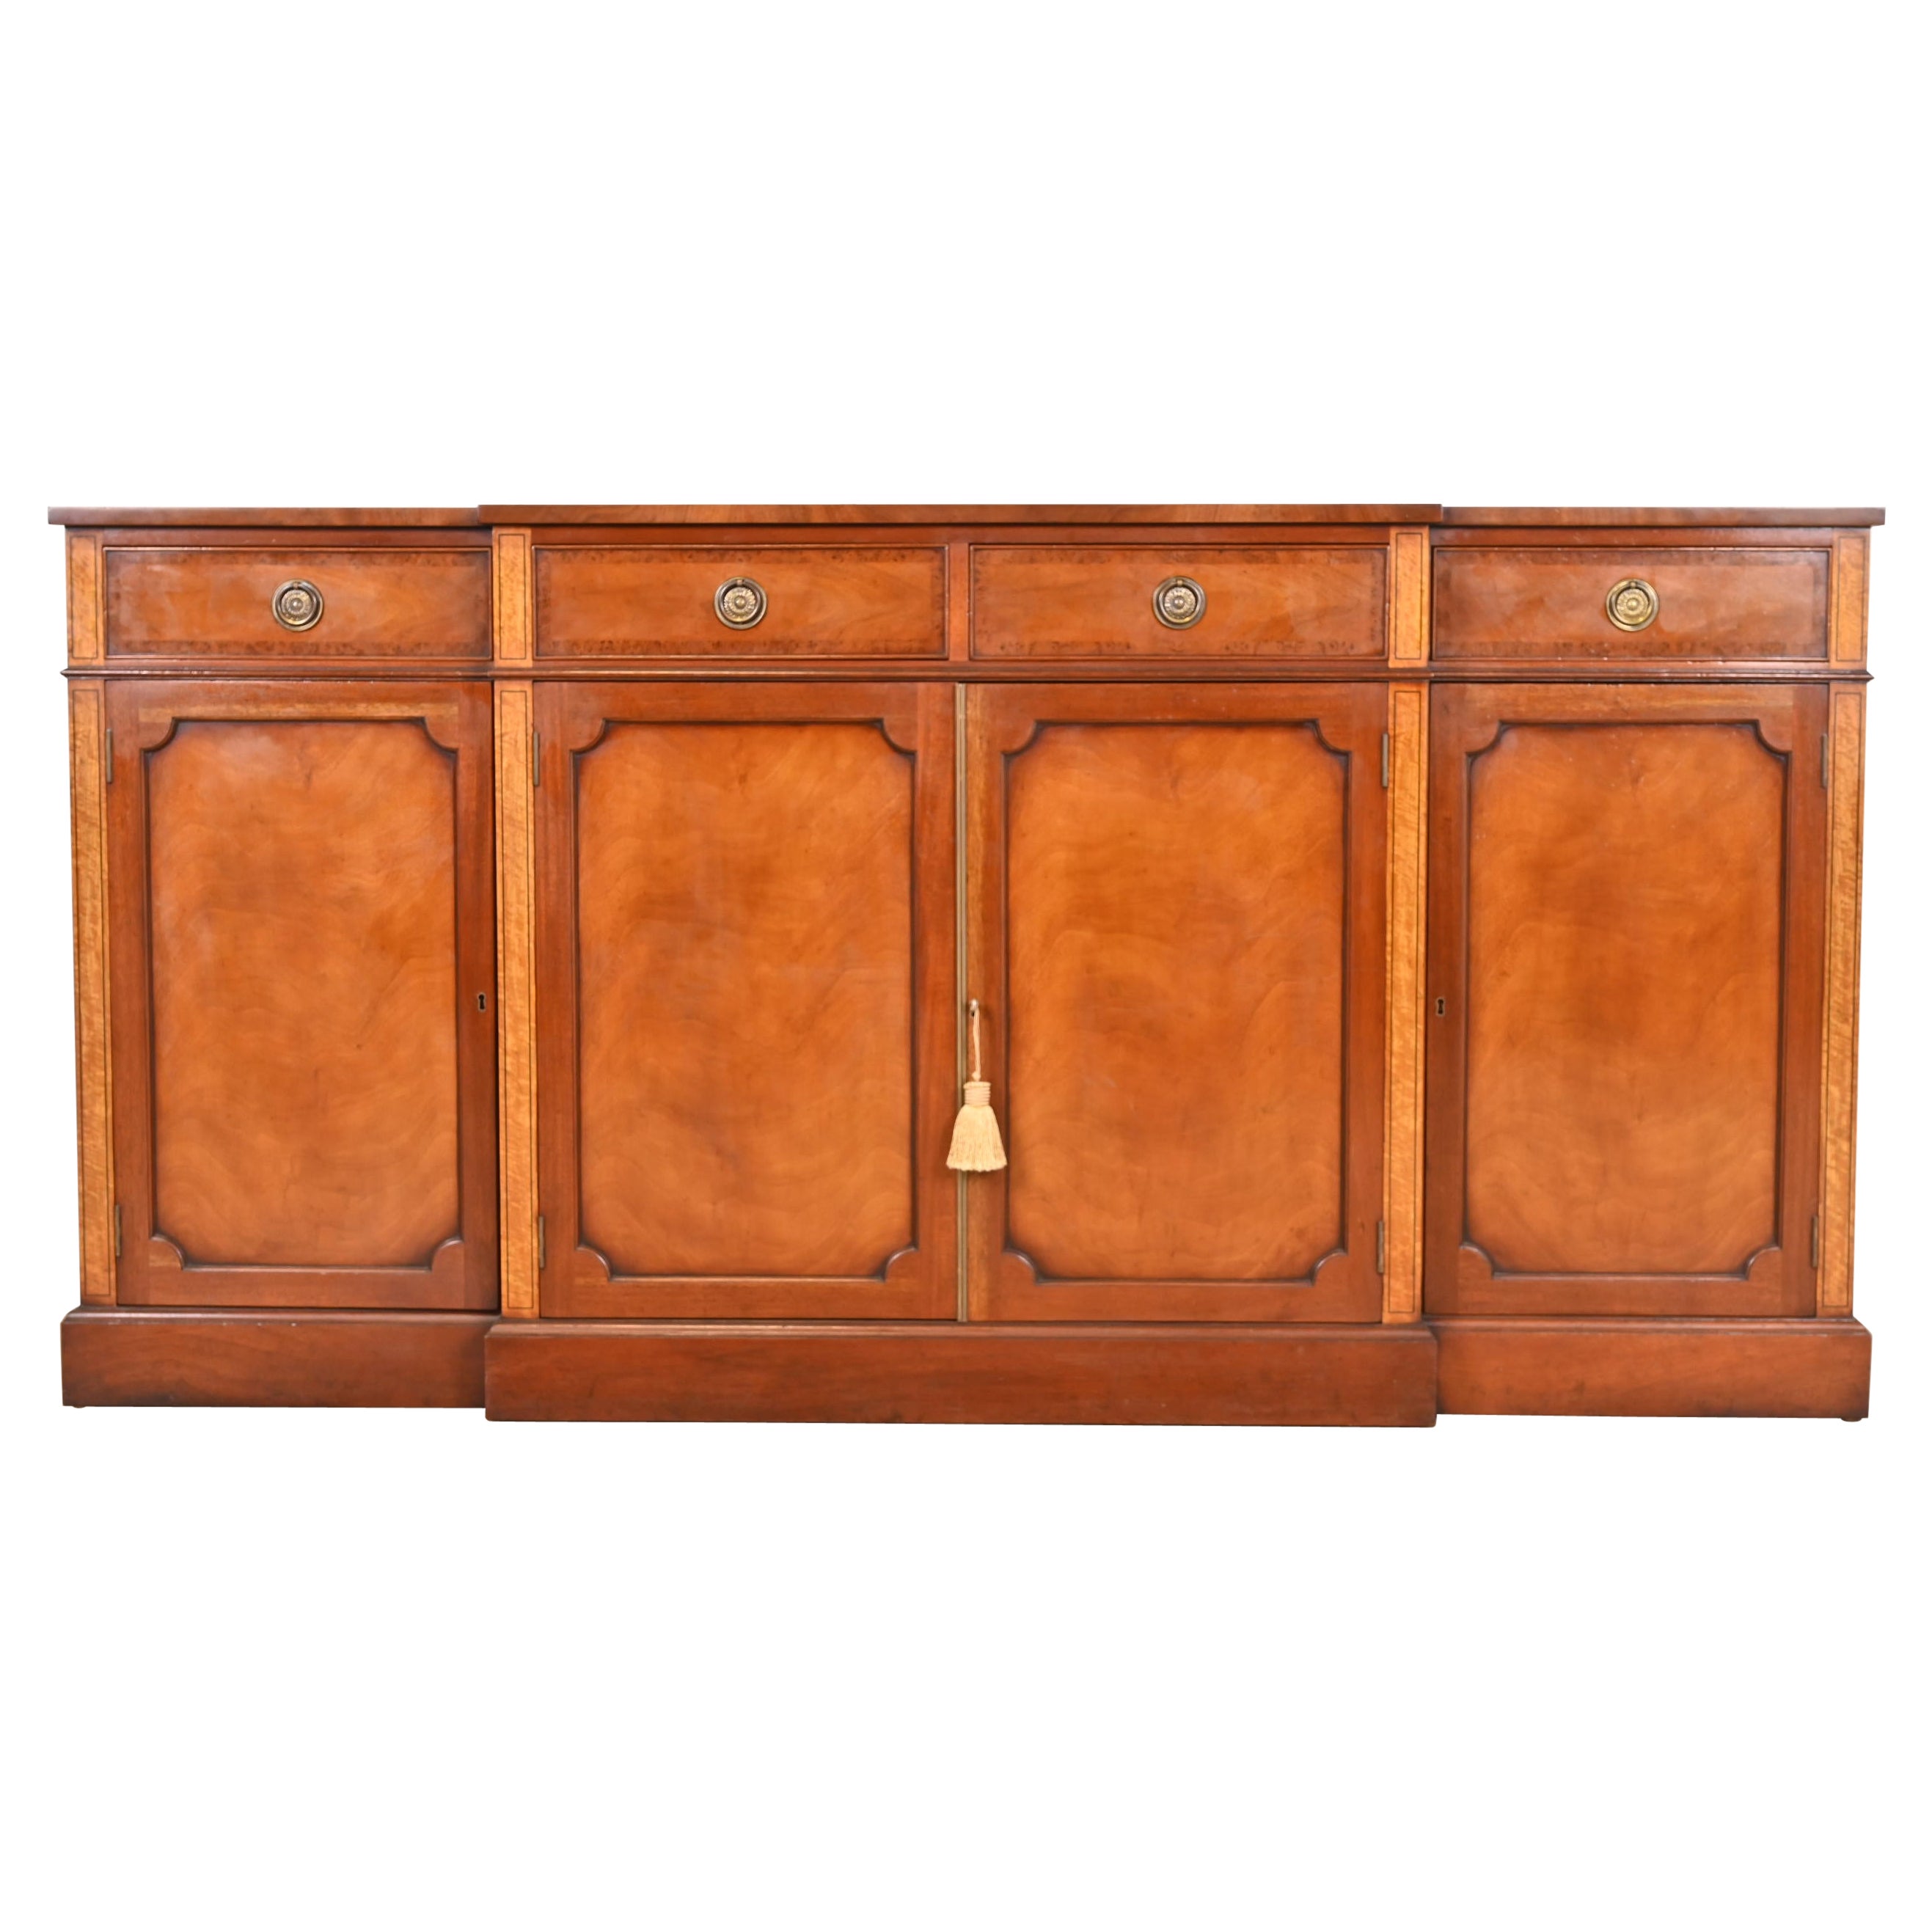 English Georgian Banded Mahogany Sideboard by Restall Brown & Clennell